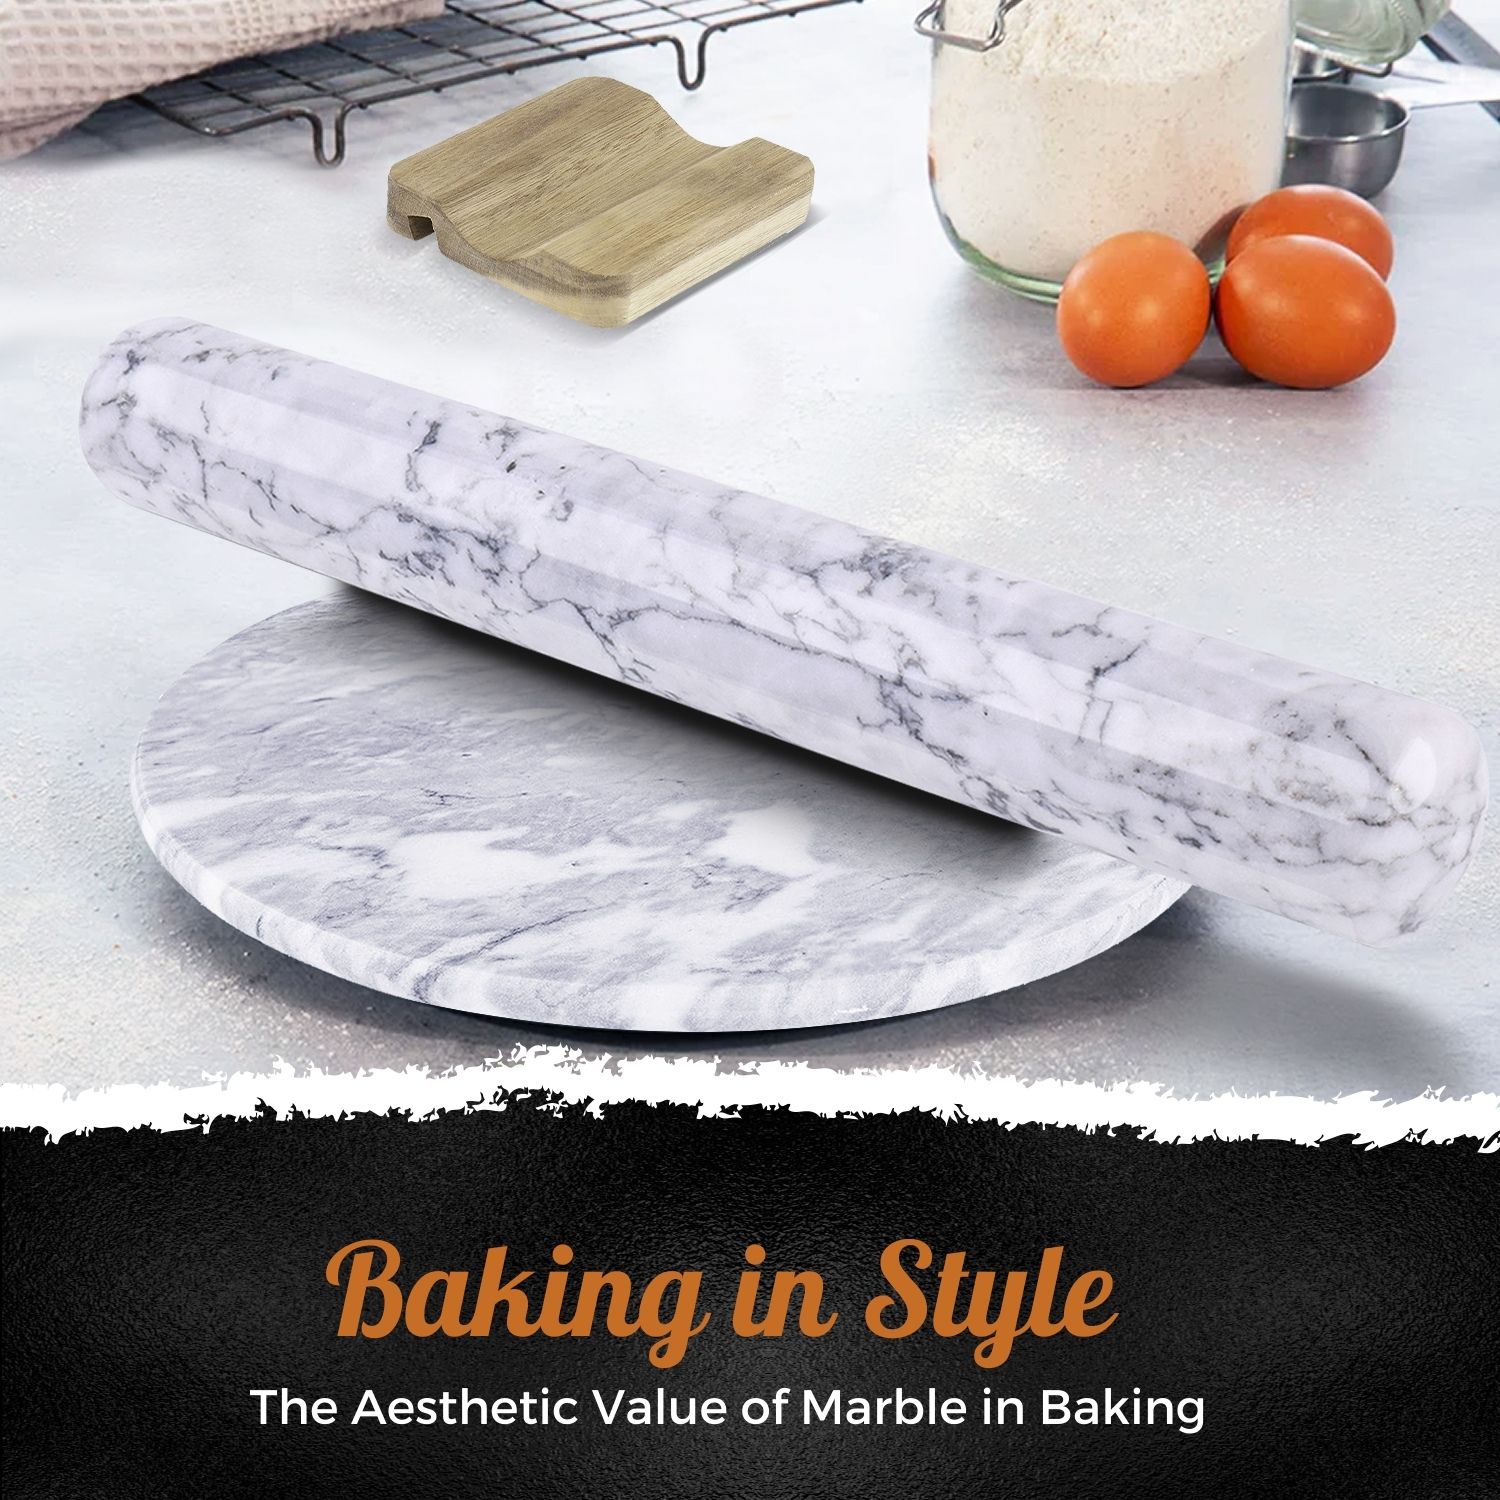 Naturally Non-Stick - This marble french style rolling pin works extremely well for any dough and pastries. The natural smooth surface of this stone baking rolling pin offers an effortless back-and-forth roll-over. It fends off any stickiness without tearing your dough. It makes your baking process easier and quicker